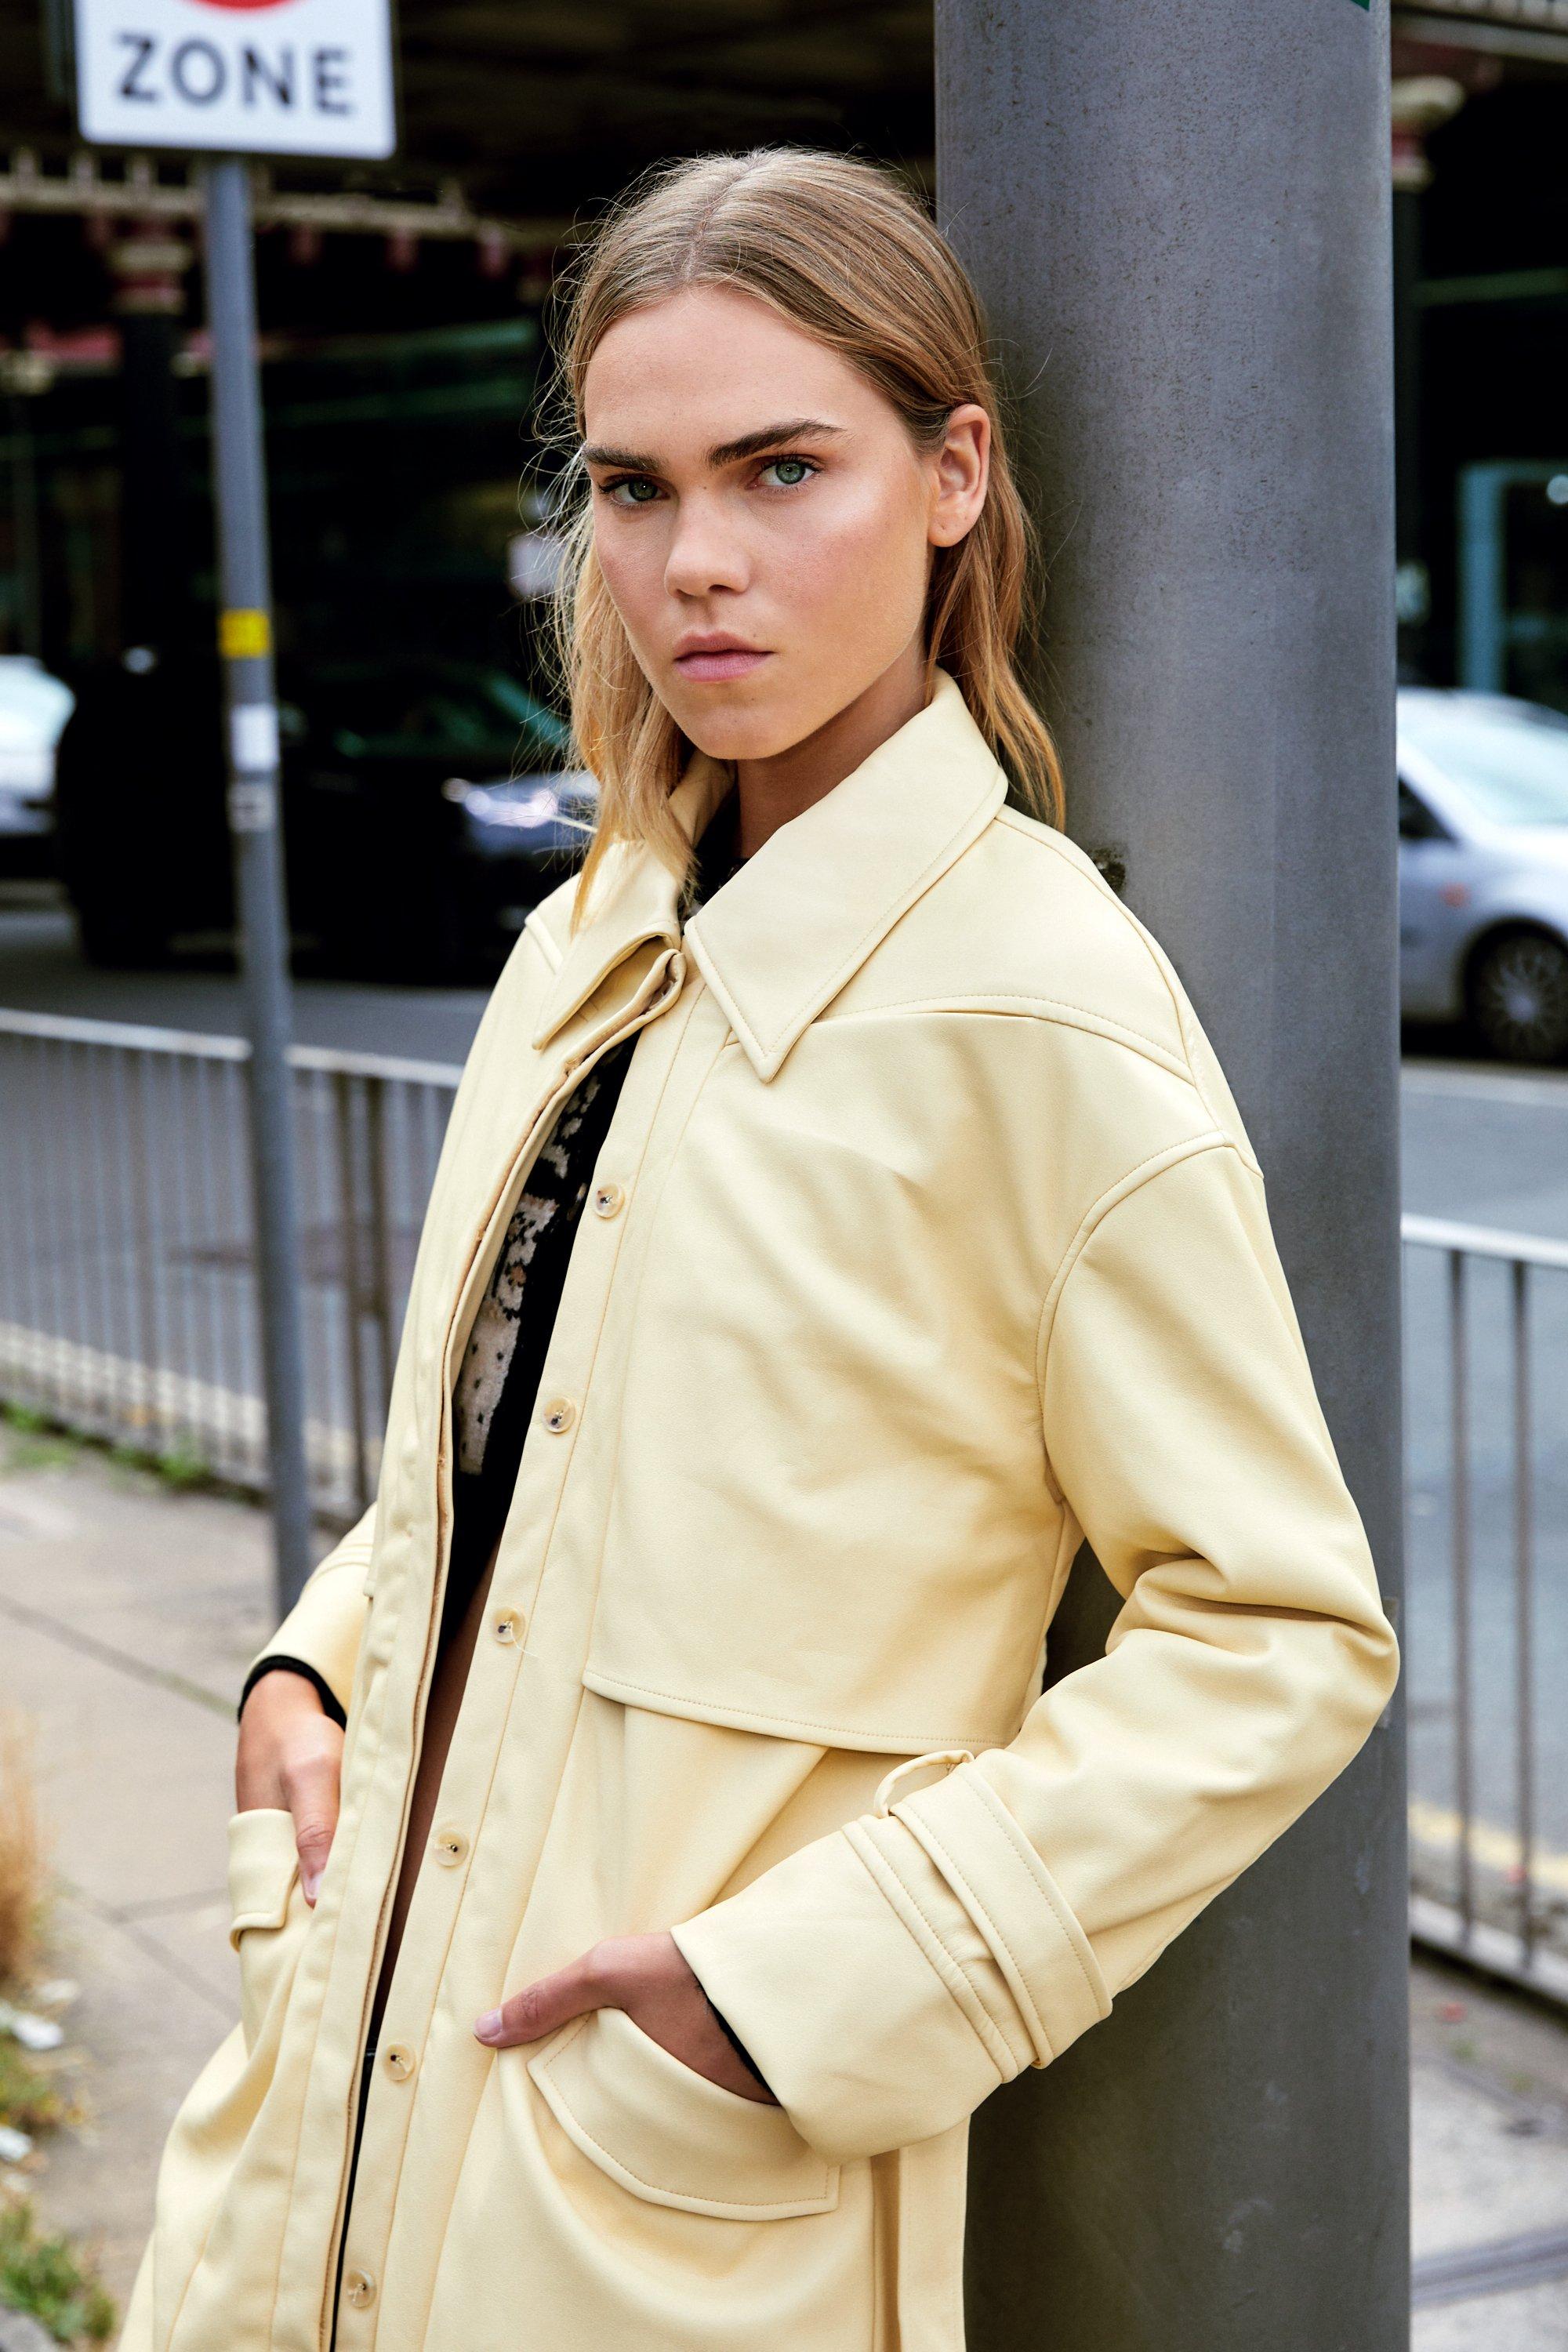 Pocket Detail Faux Leather Trench Coat